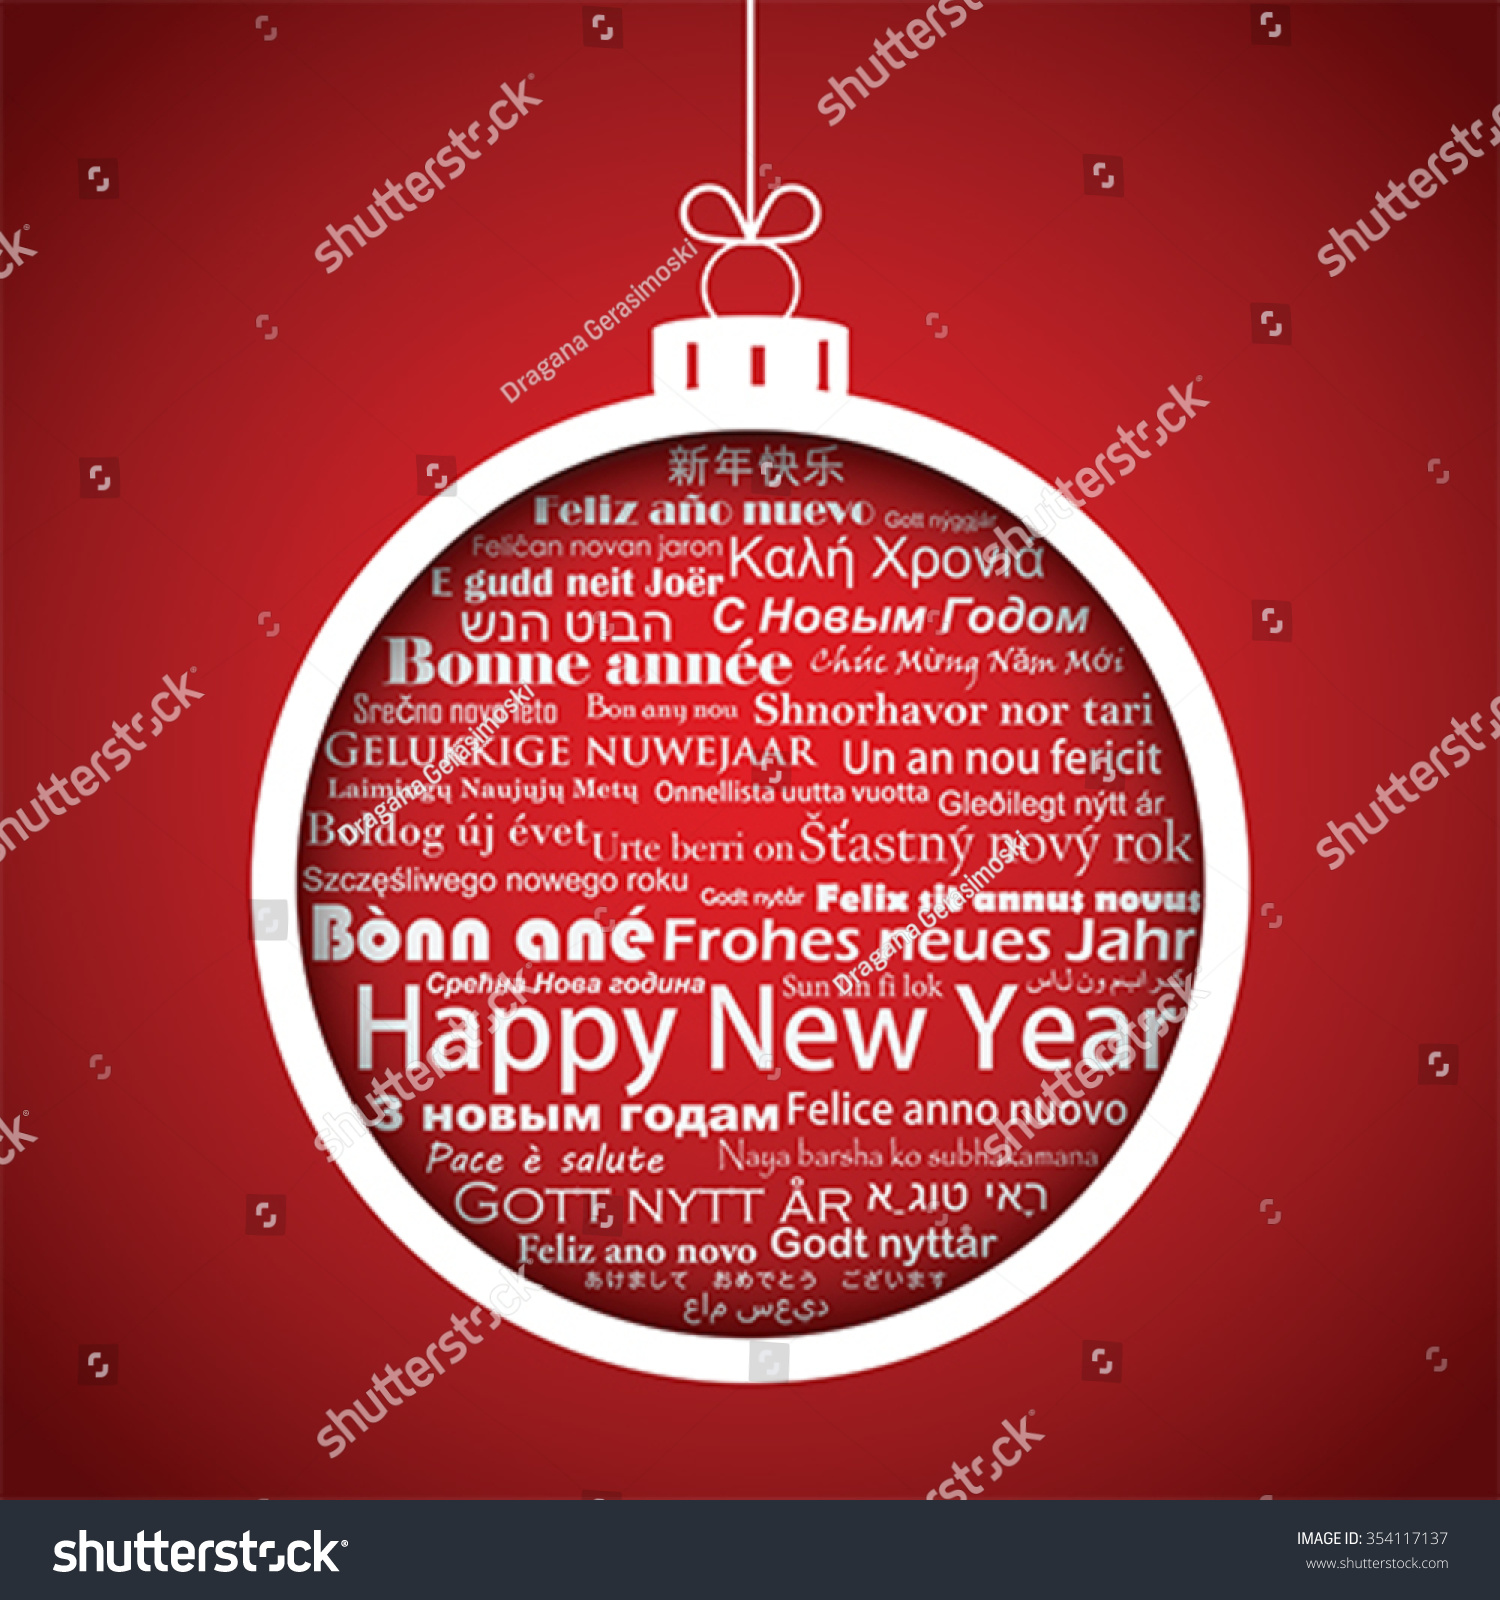 happy-new-year-word-tag-cloud-stock-vector-royalty-free-354117137